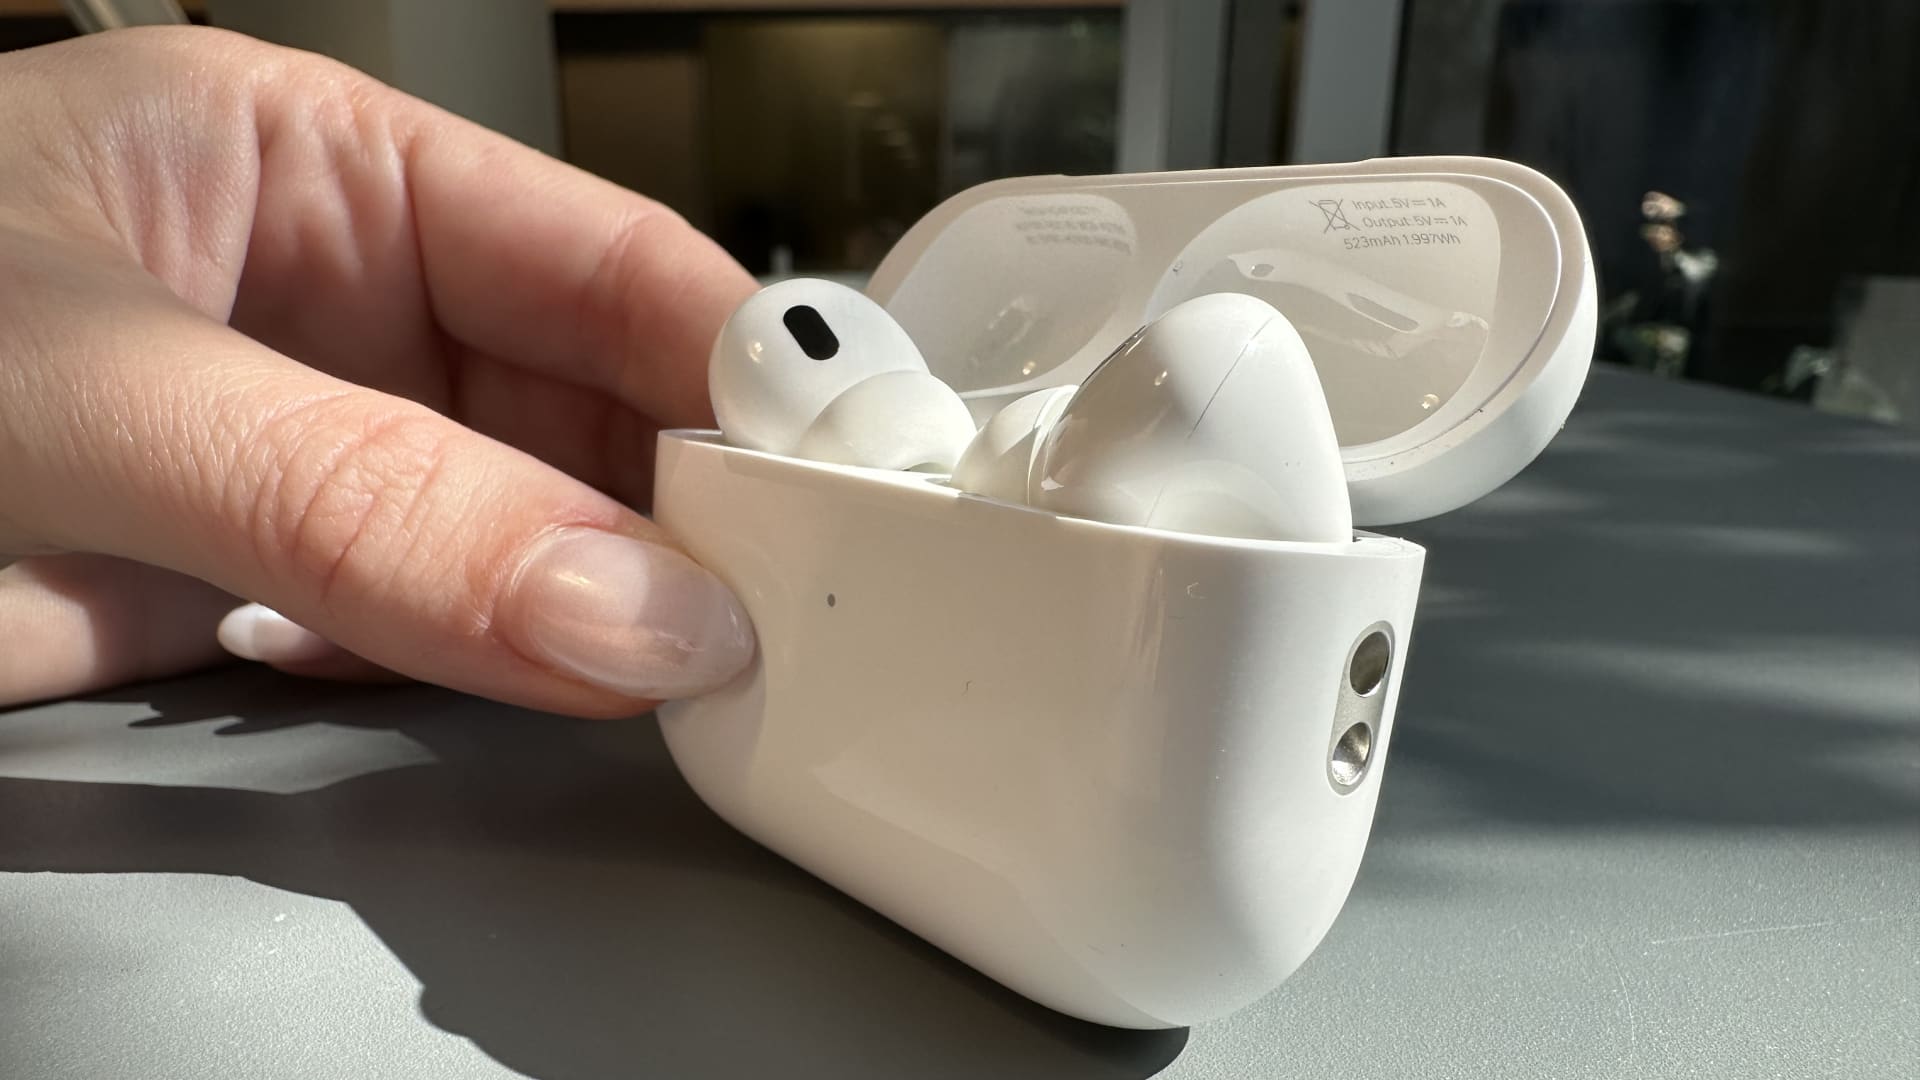 How to get the most out of Apple's new AirPods - CNBC